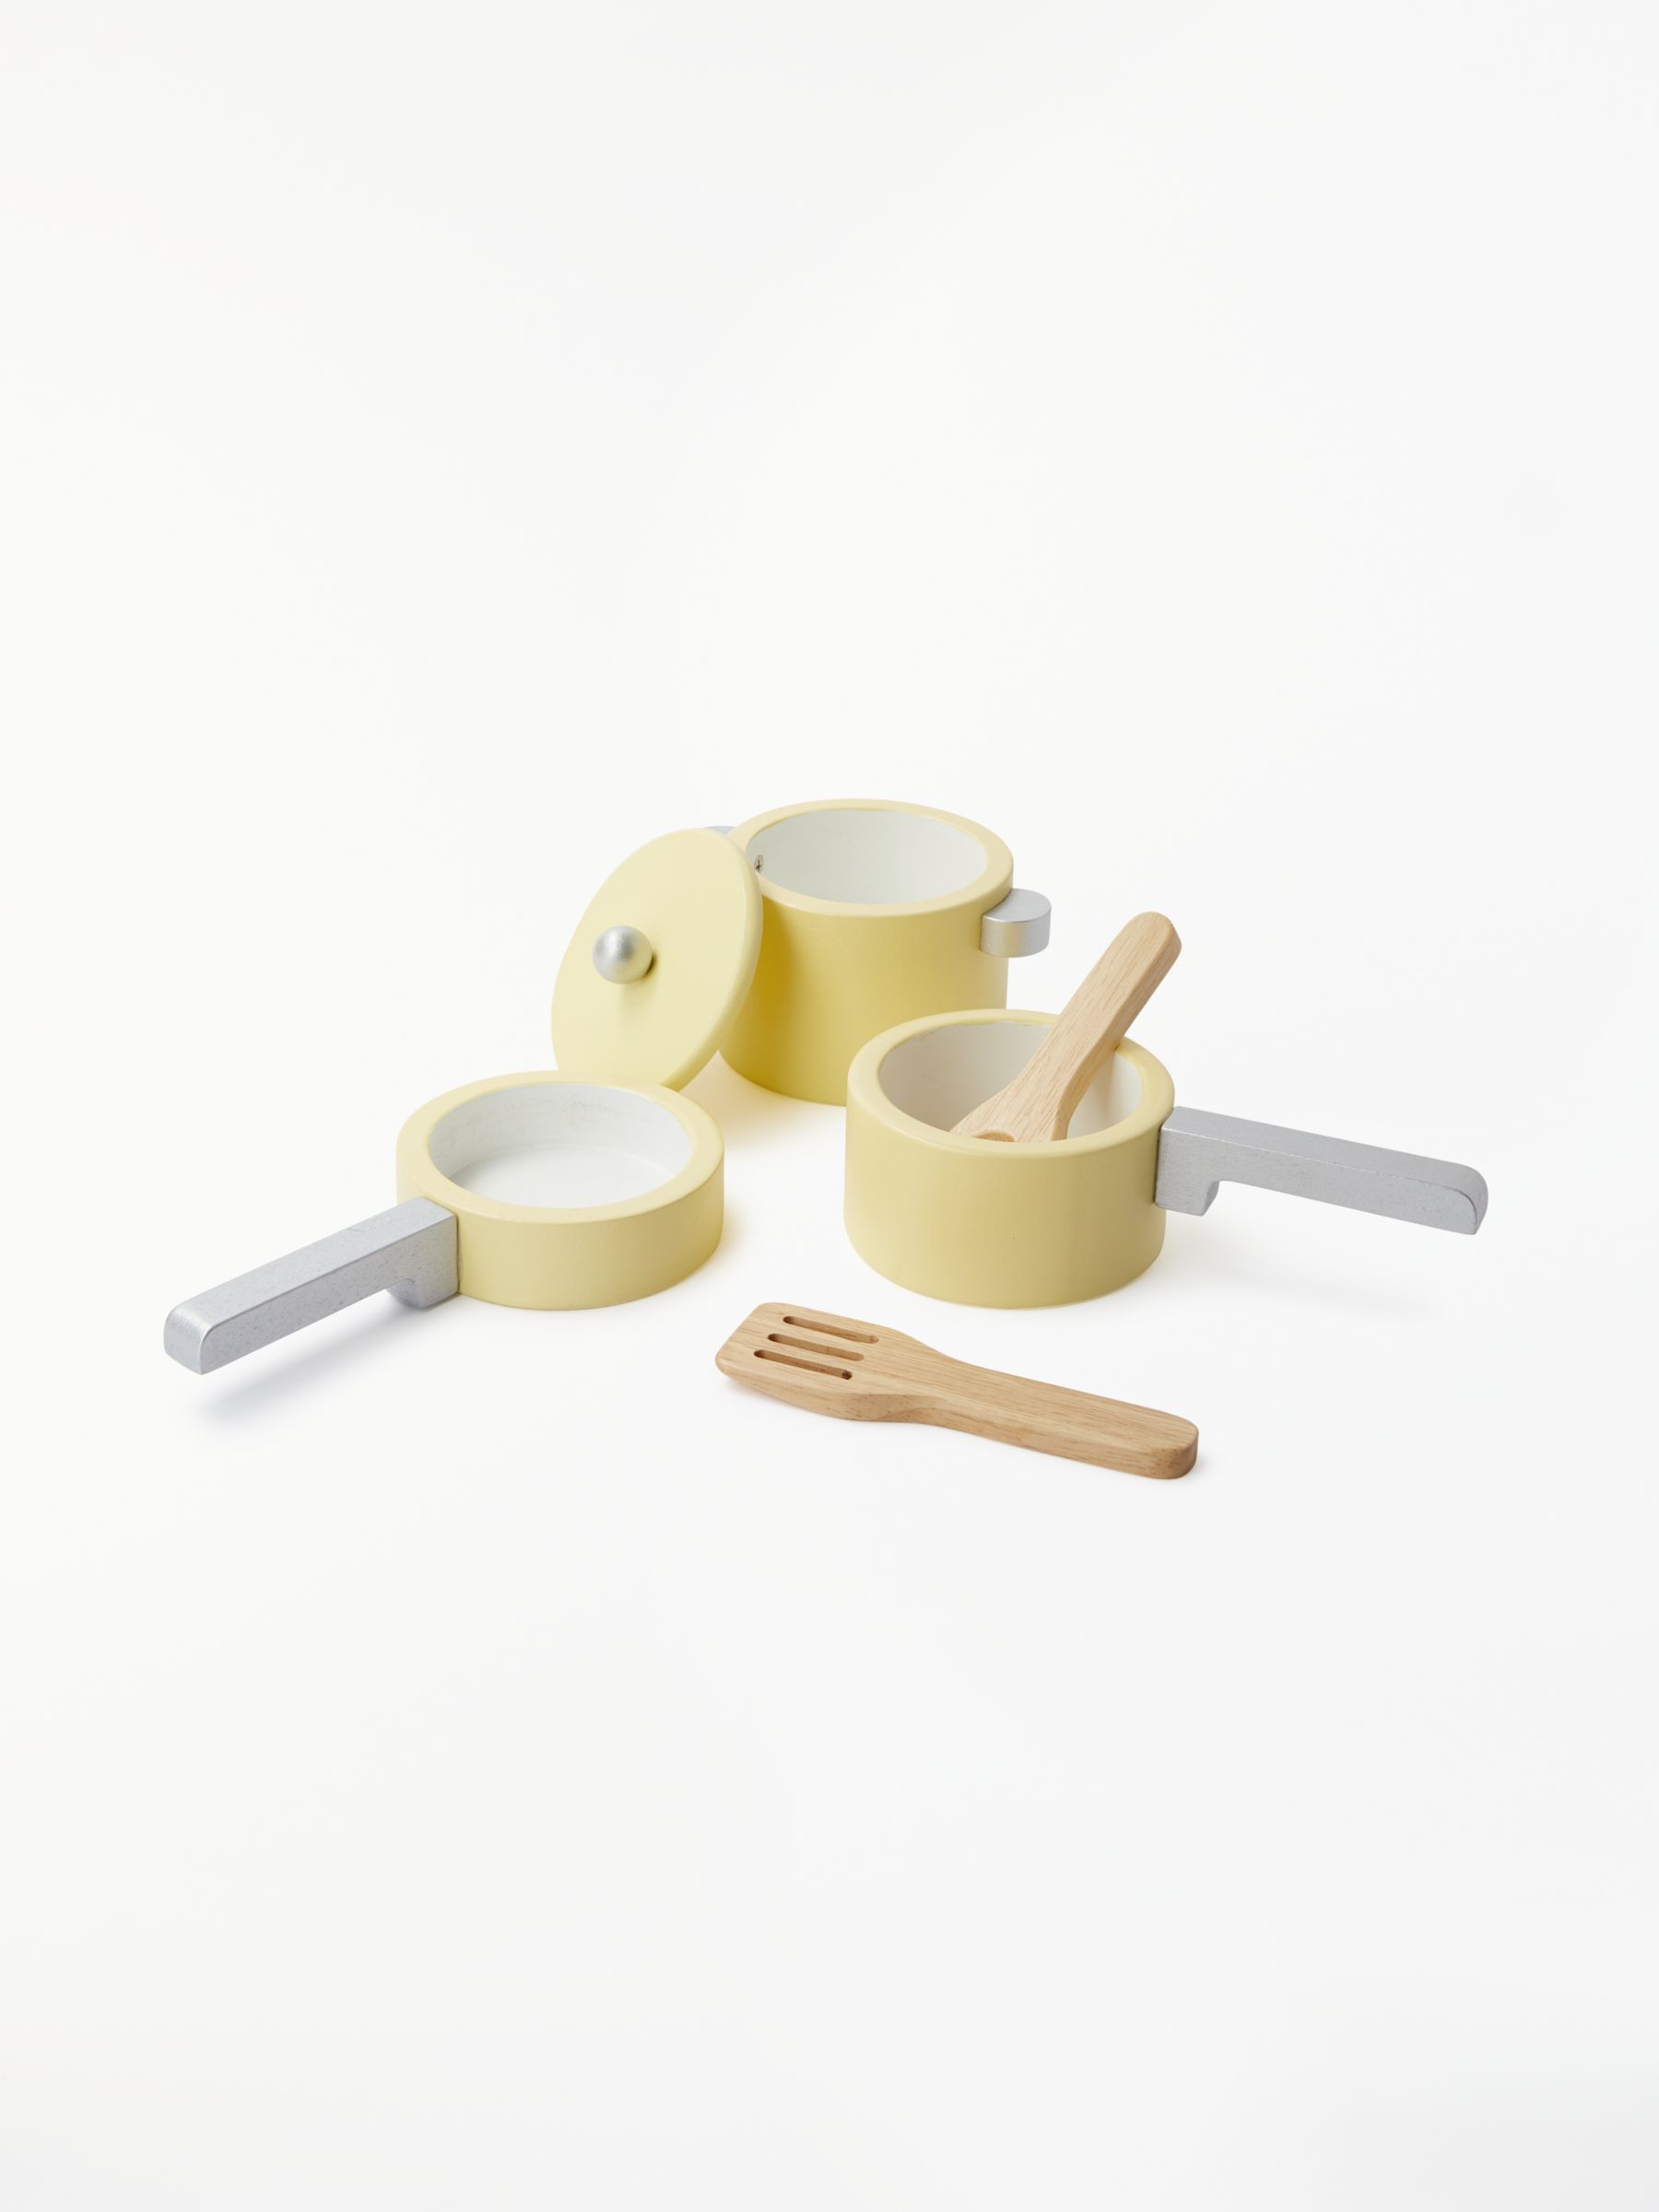 wooden pots and pans for childrens kitchen